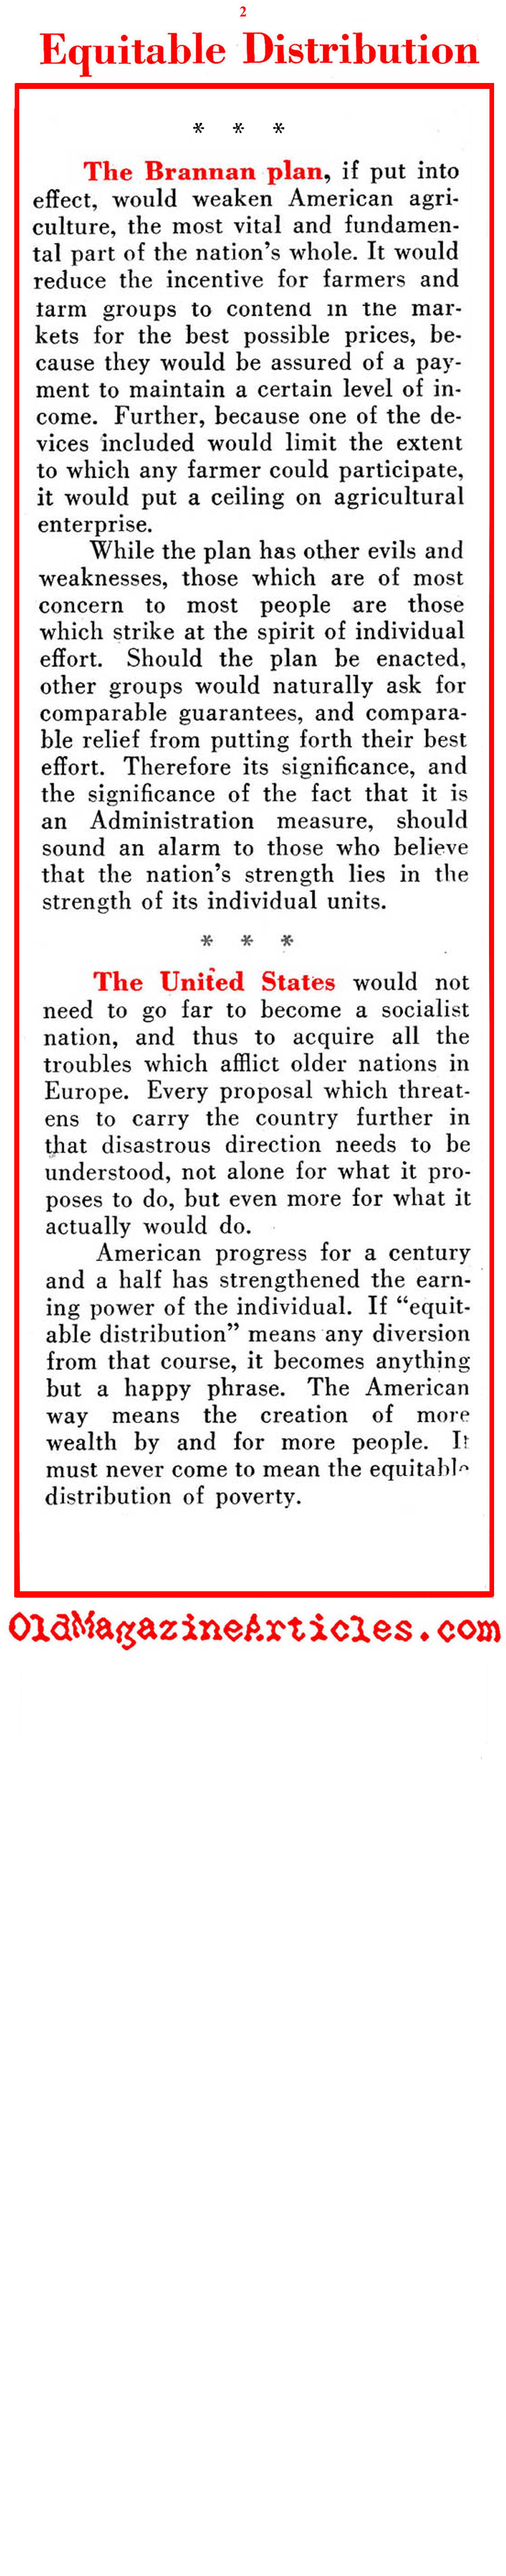 When President Truman Tried his Hand at ''Distributing Wealth'' (Pathfinder Magazine, 1949)